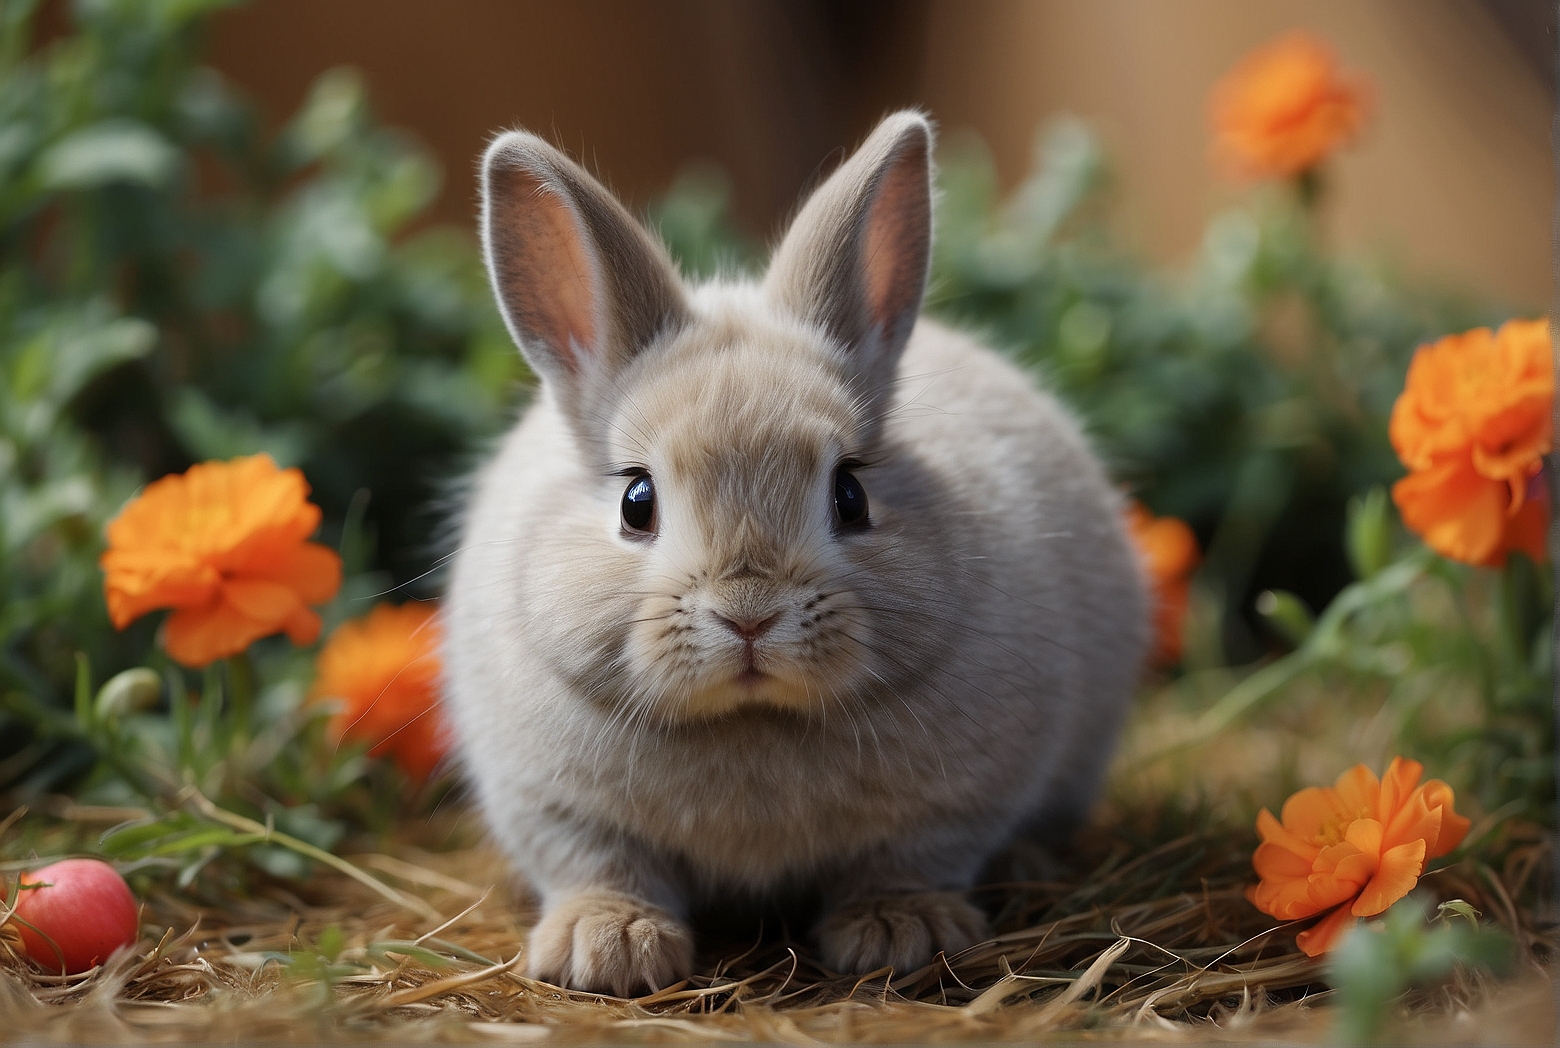 A Guide to Netherland Dwarf Bunnies